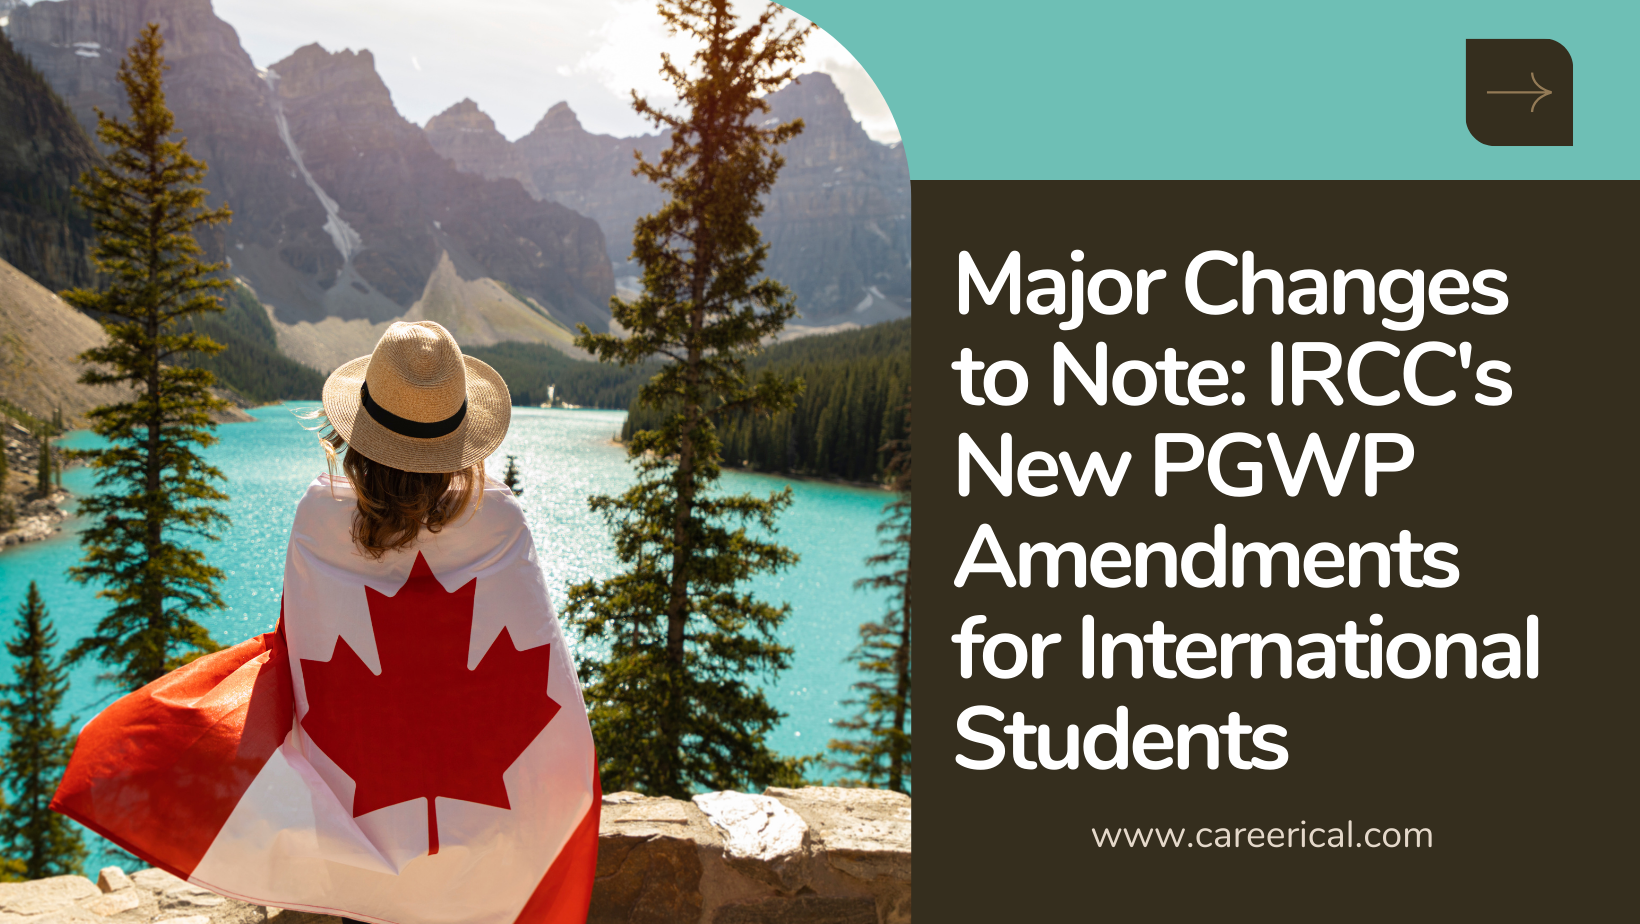 Major Changes to Note IRCC's New PGWP Amendments for International Students